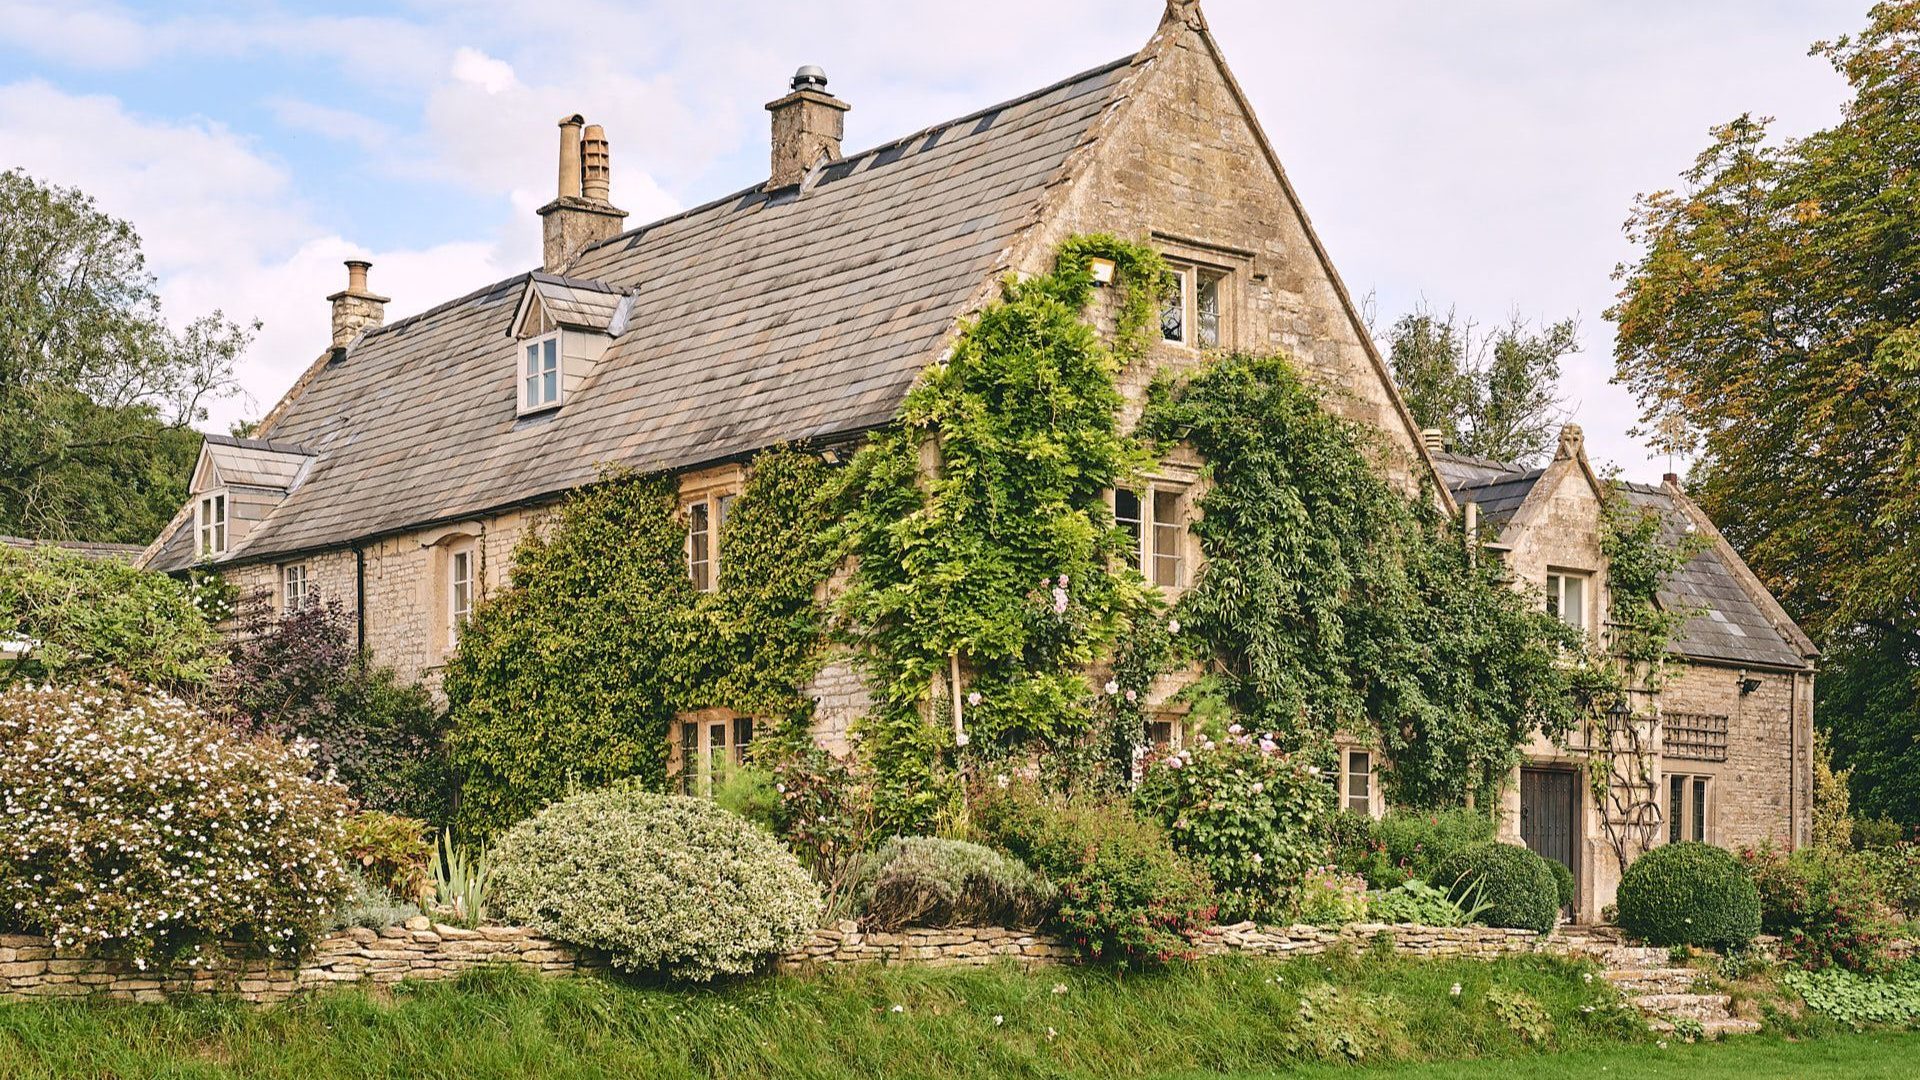 Quaint exterior of Withington Grange cottage in the Cotswolds